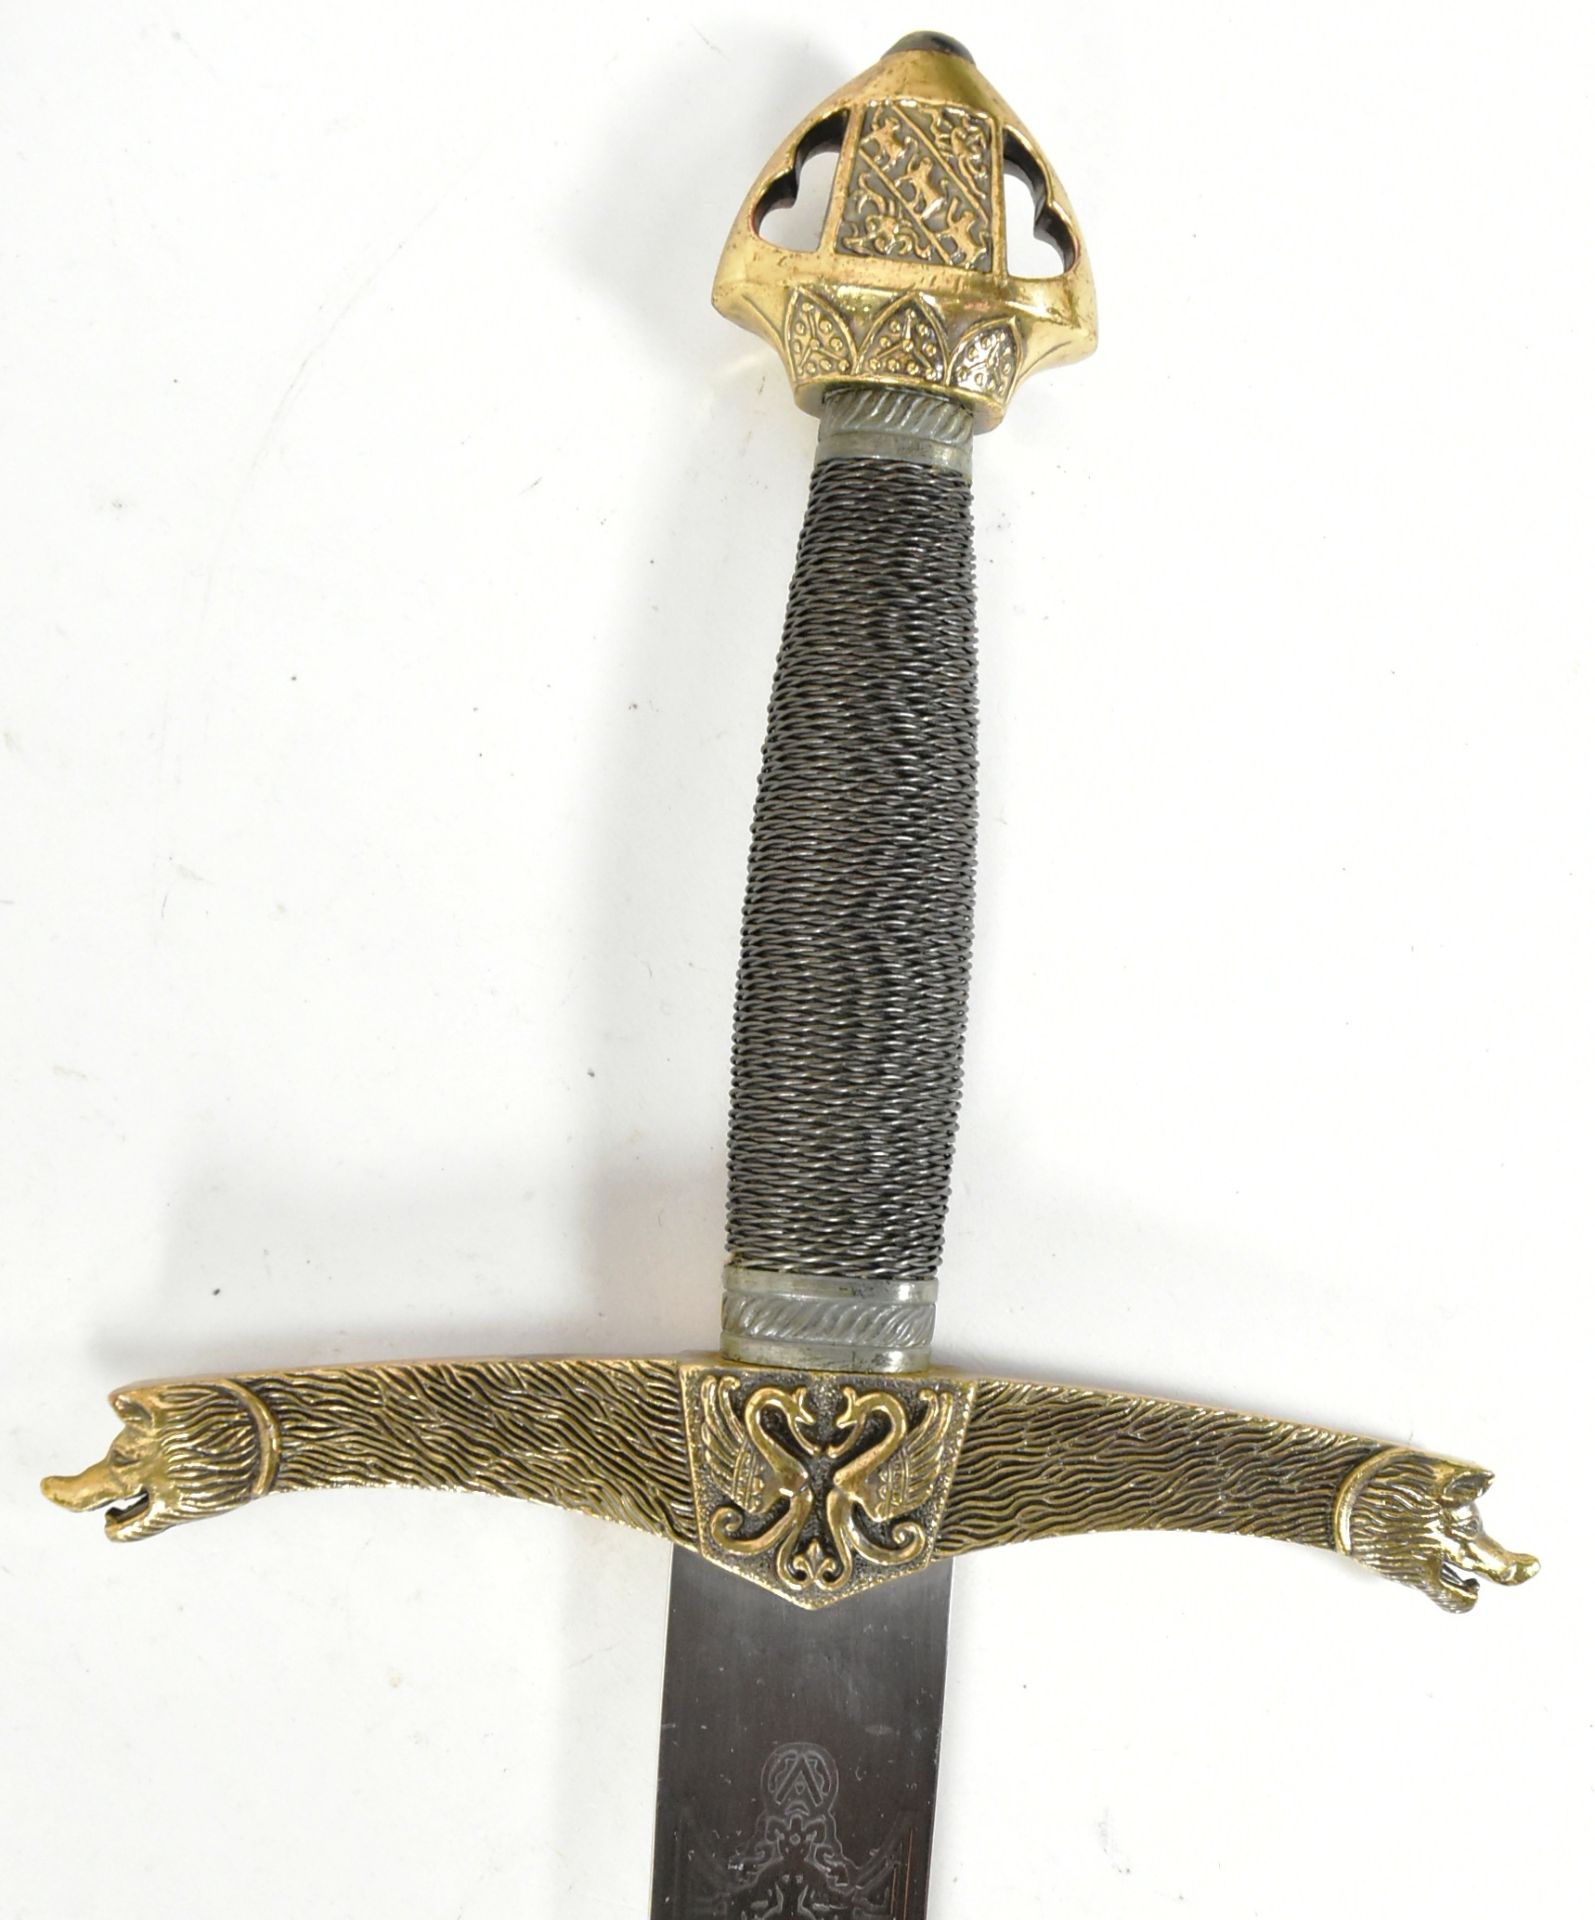 KNIGHTS OF THE ROUND TABLE - SIR LANCELOT REPLICA SWORD - Image 3 of 5